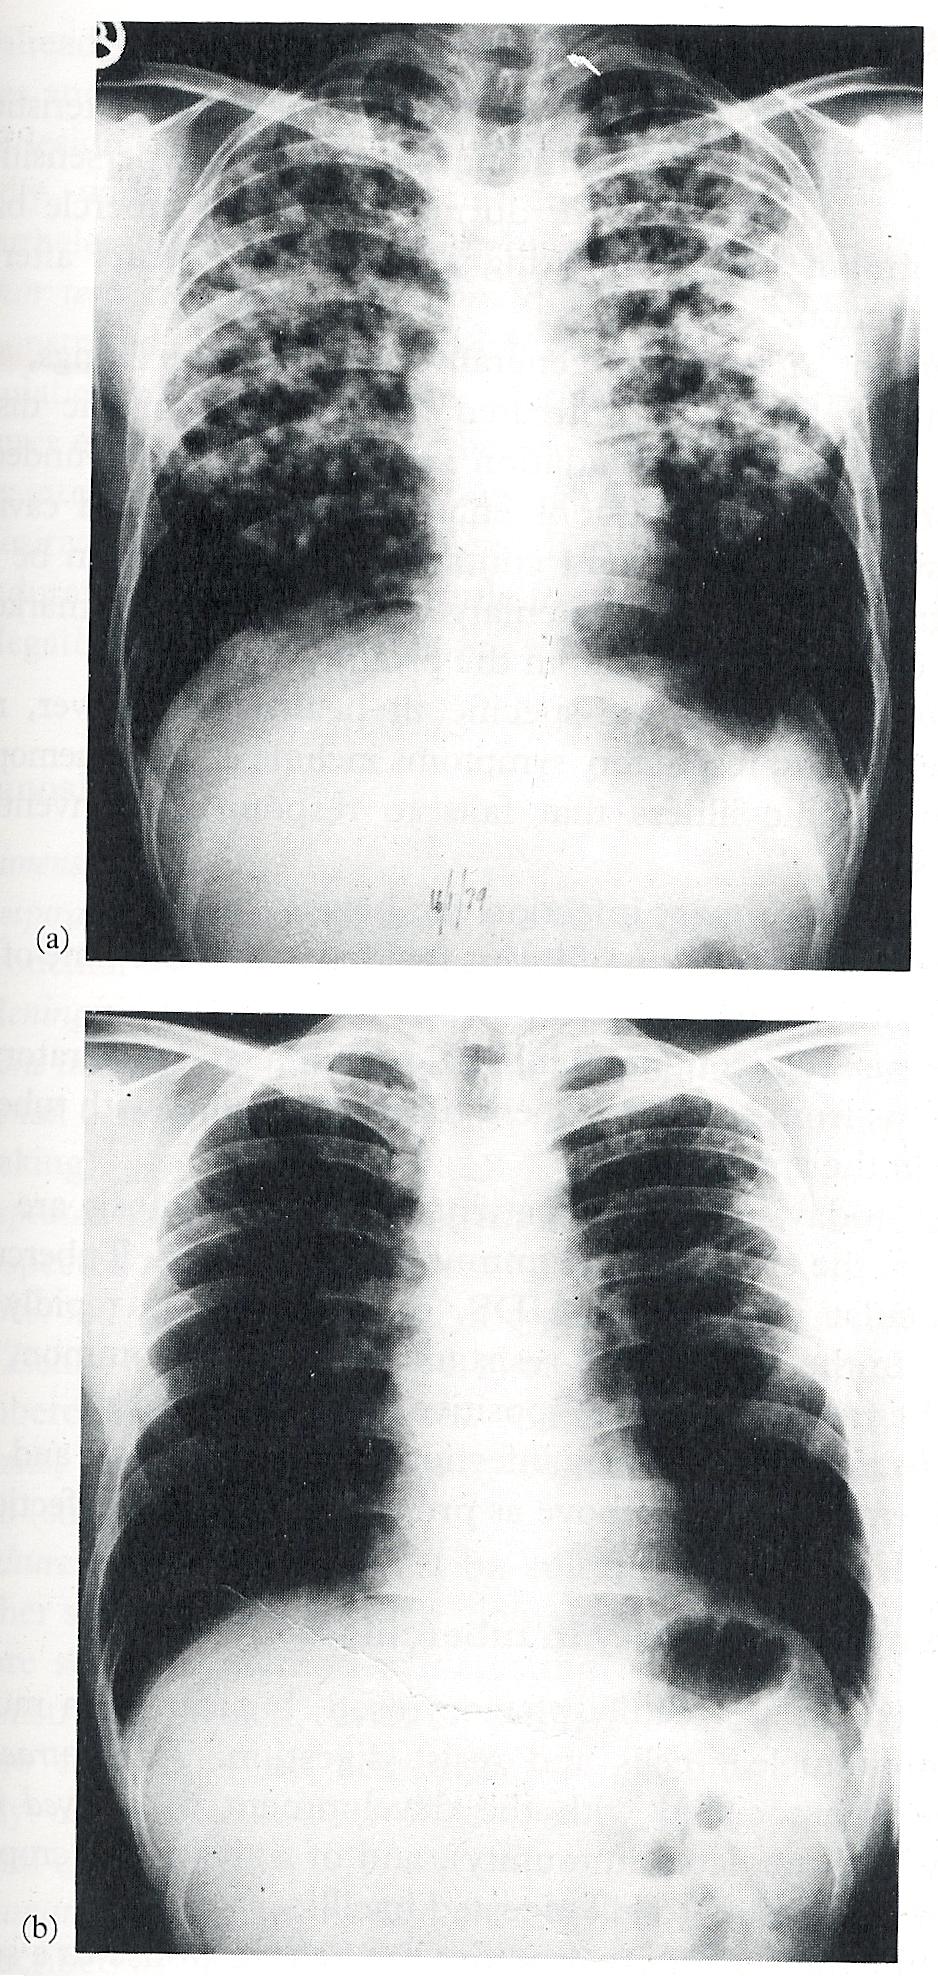 Tuberculosis: (a) Chest X-ray of a patient with tuberculosis bronchopneumonia.